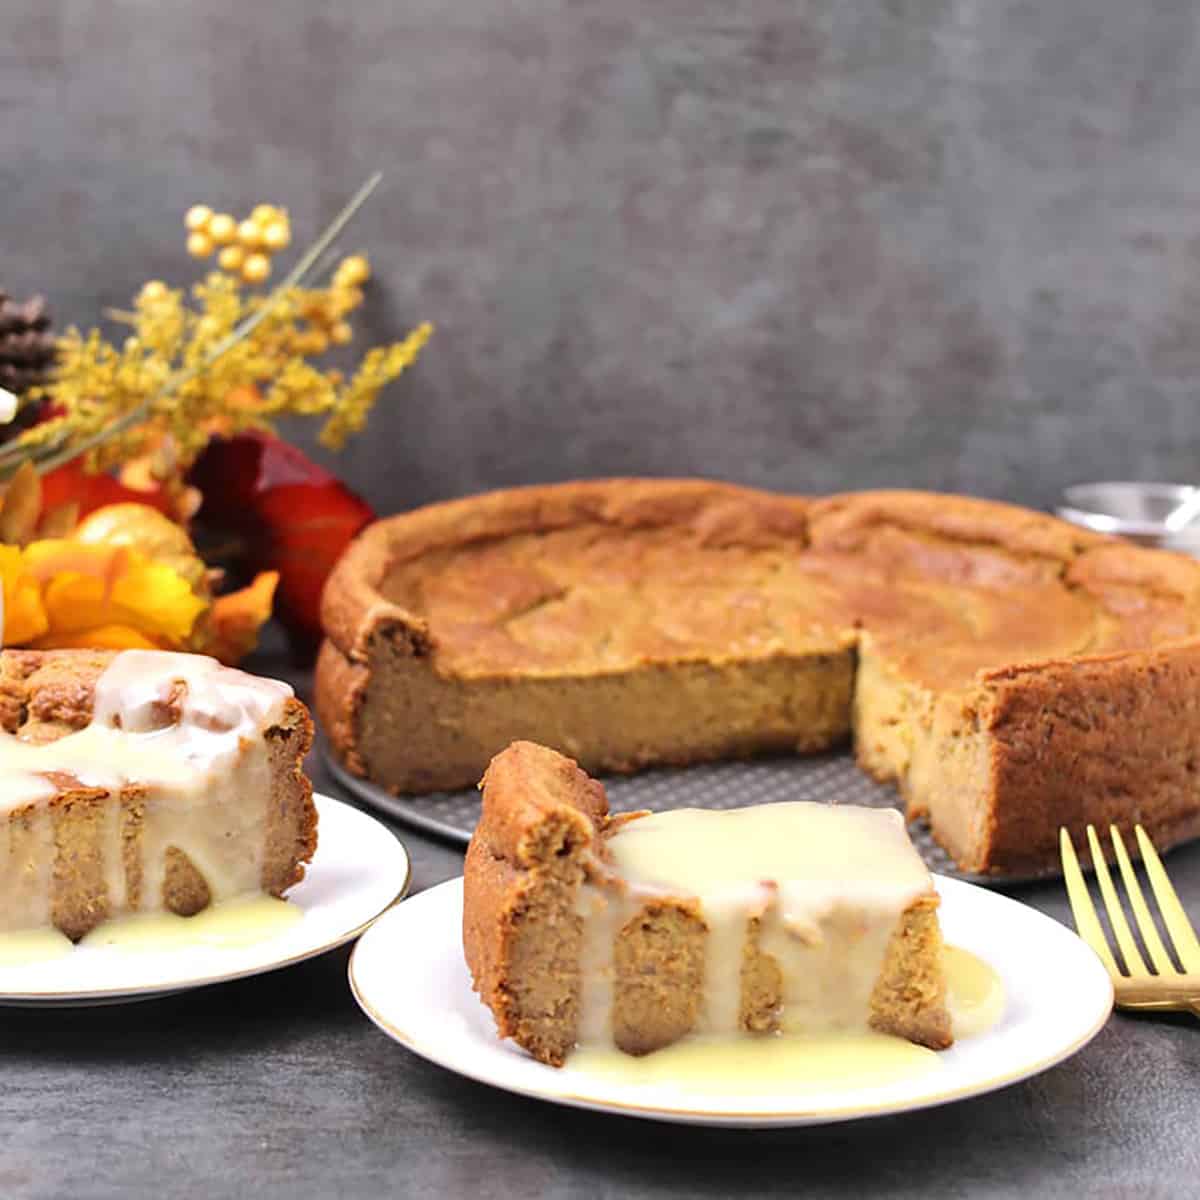 Two slices of rich and classic old fashioned persimmon apple pudding cake on a serving plate. 